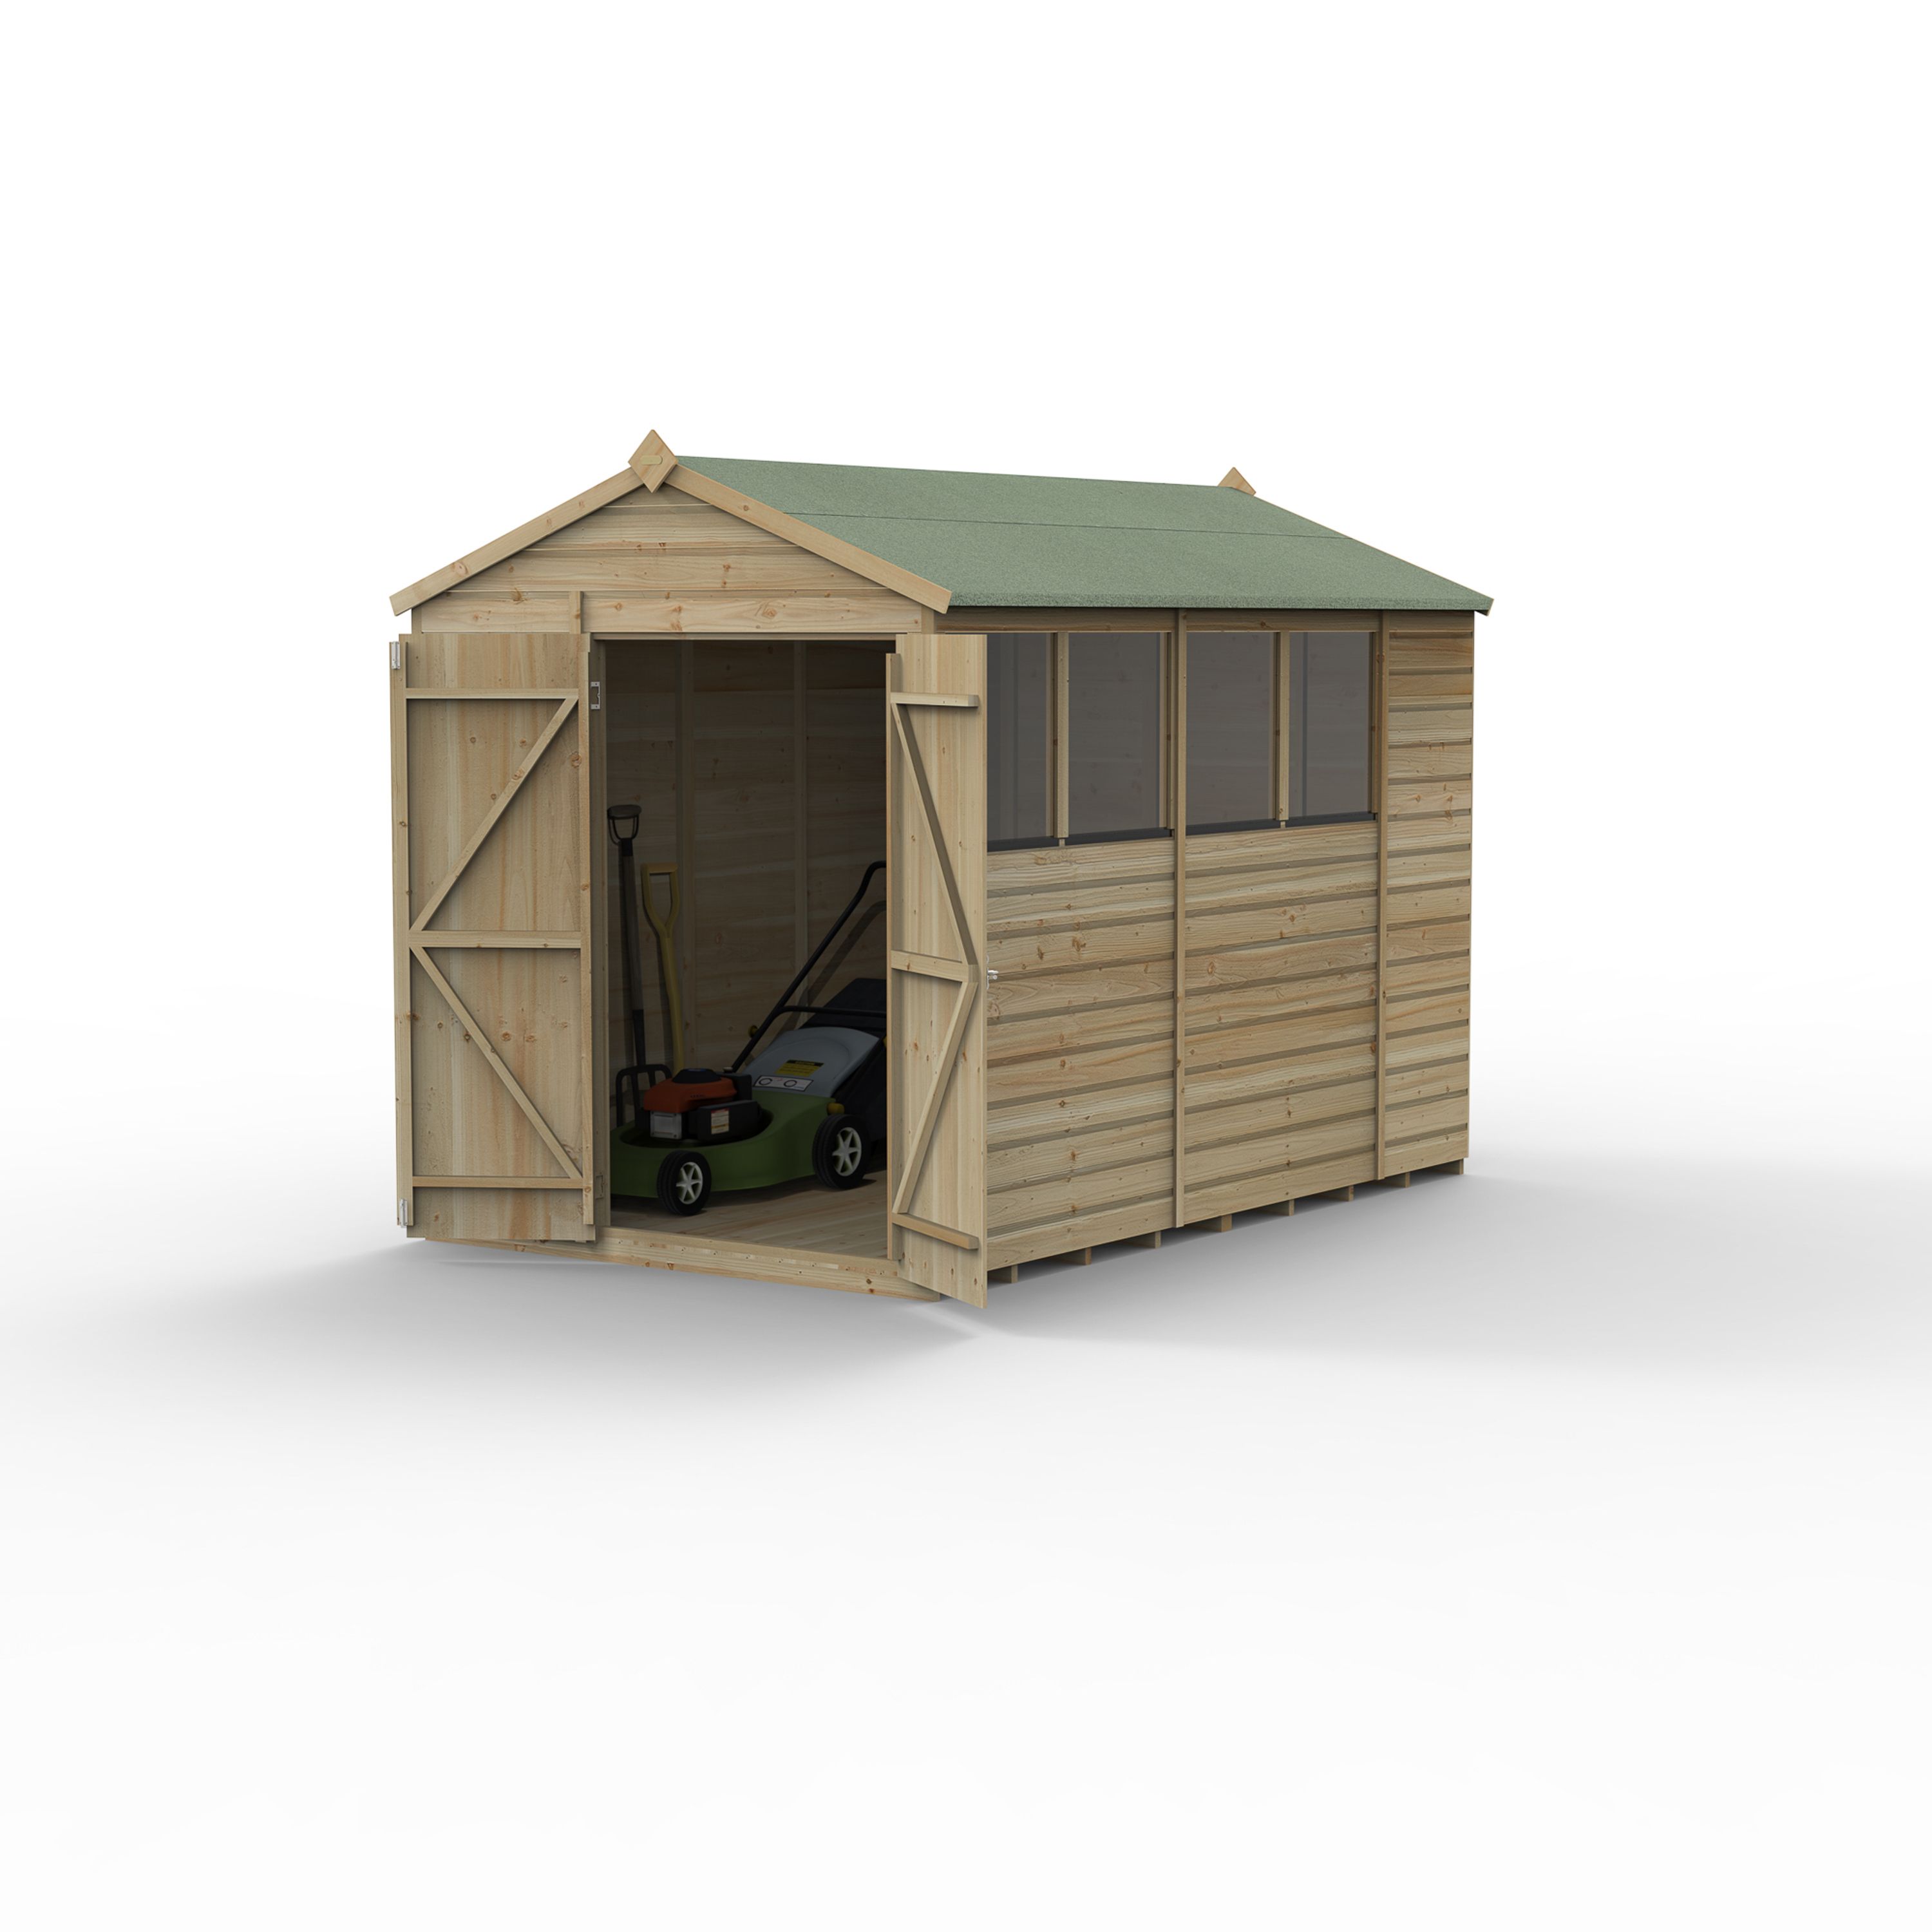 Forest Garden Beckwood 10x6 ft Apex Natural timber Wooden 2 door Shed with floor & 4 windows (Base included) - Assembly not required